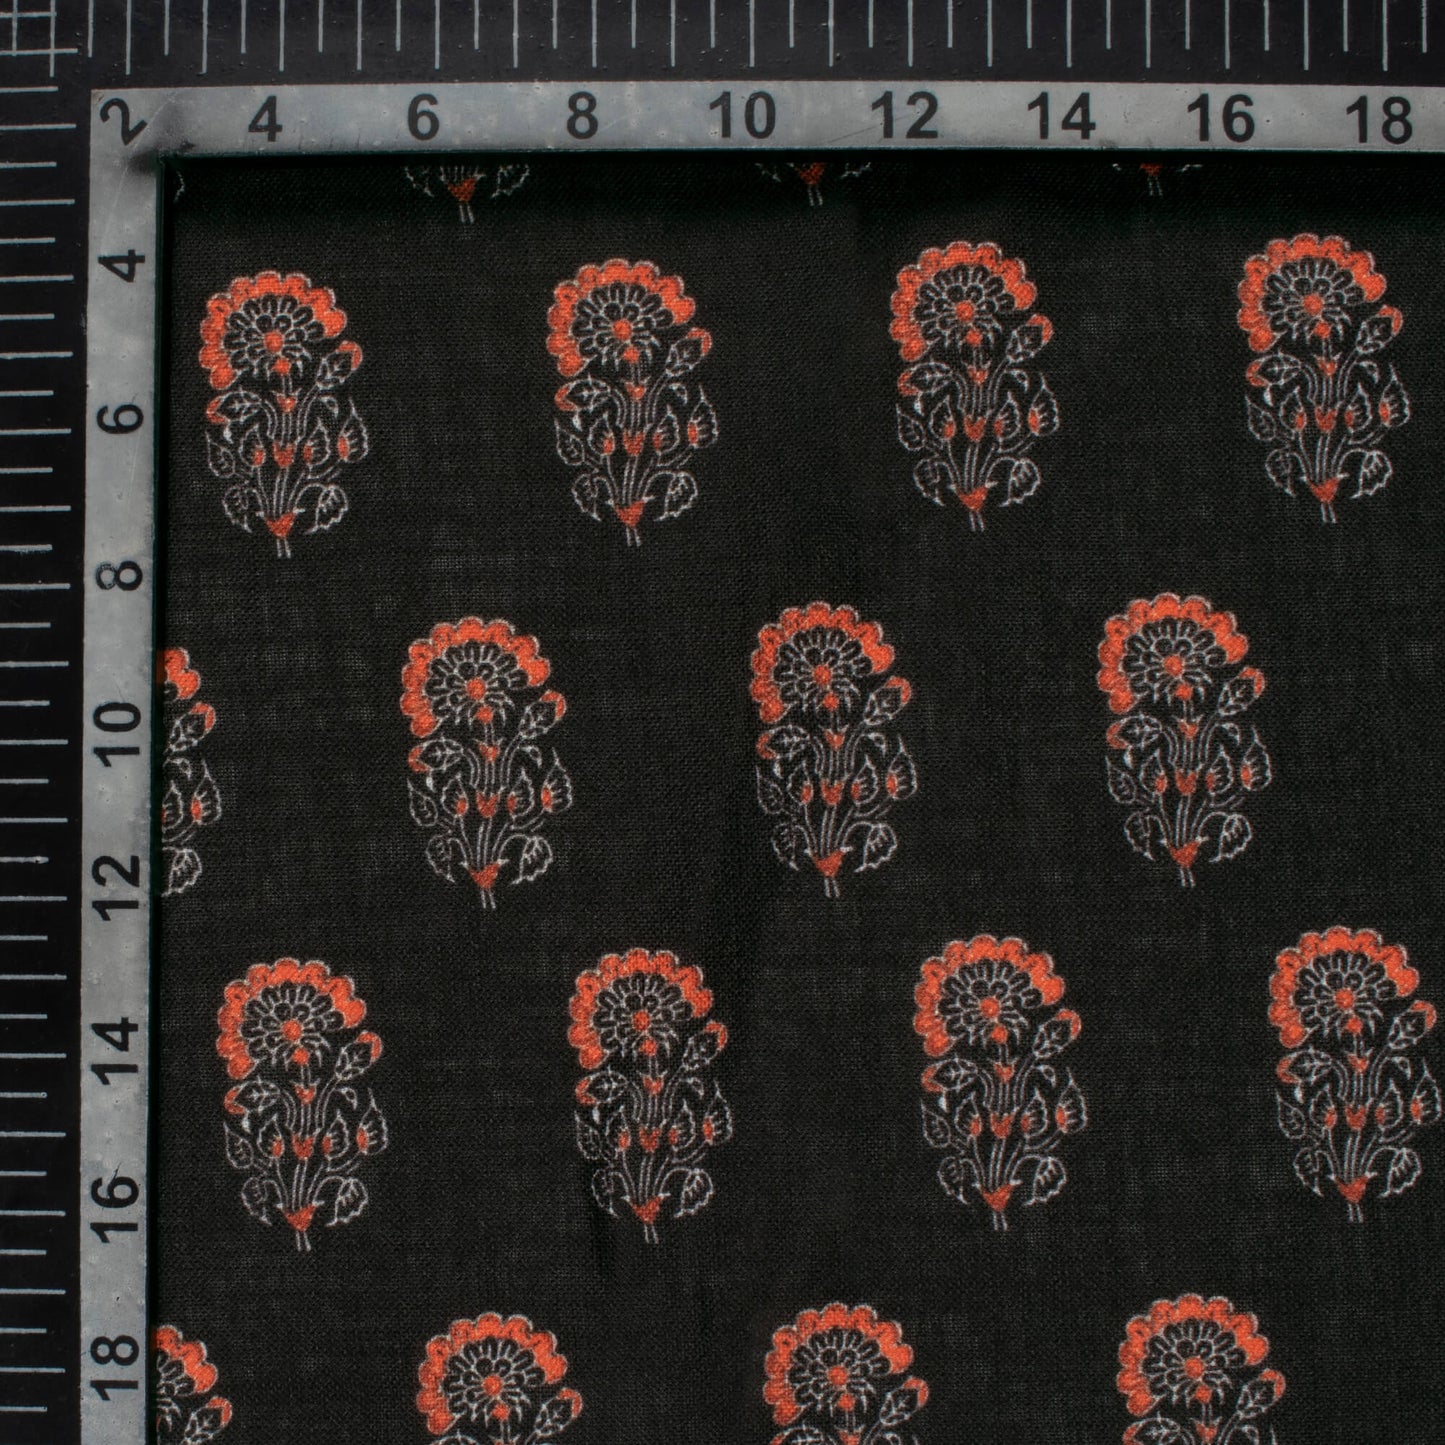 Black And Orange Floral Pattern Digital Print Linen Textured Fabric (Width 56 Inches)